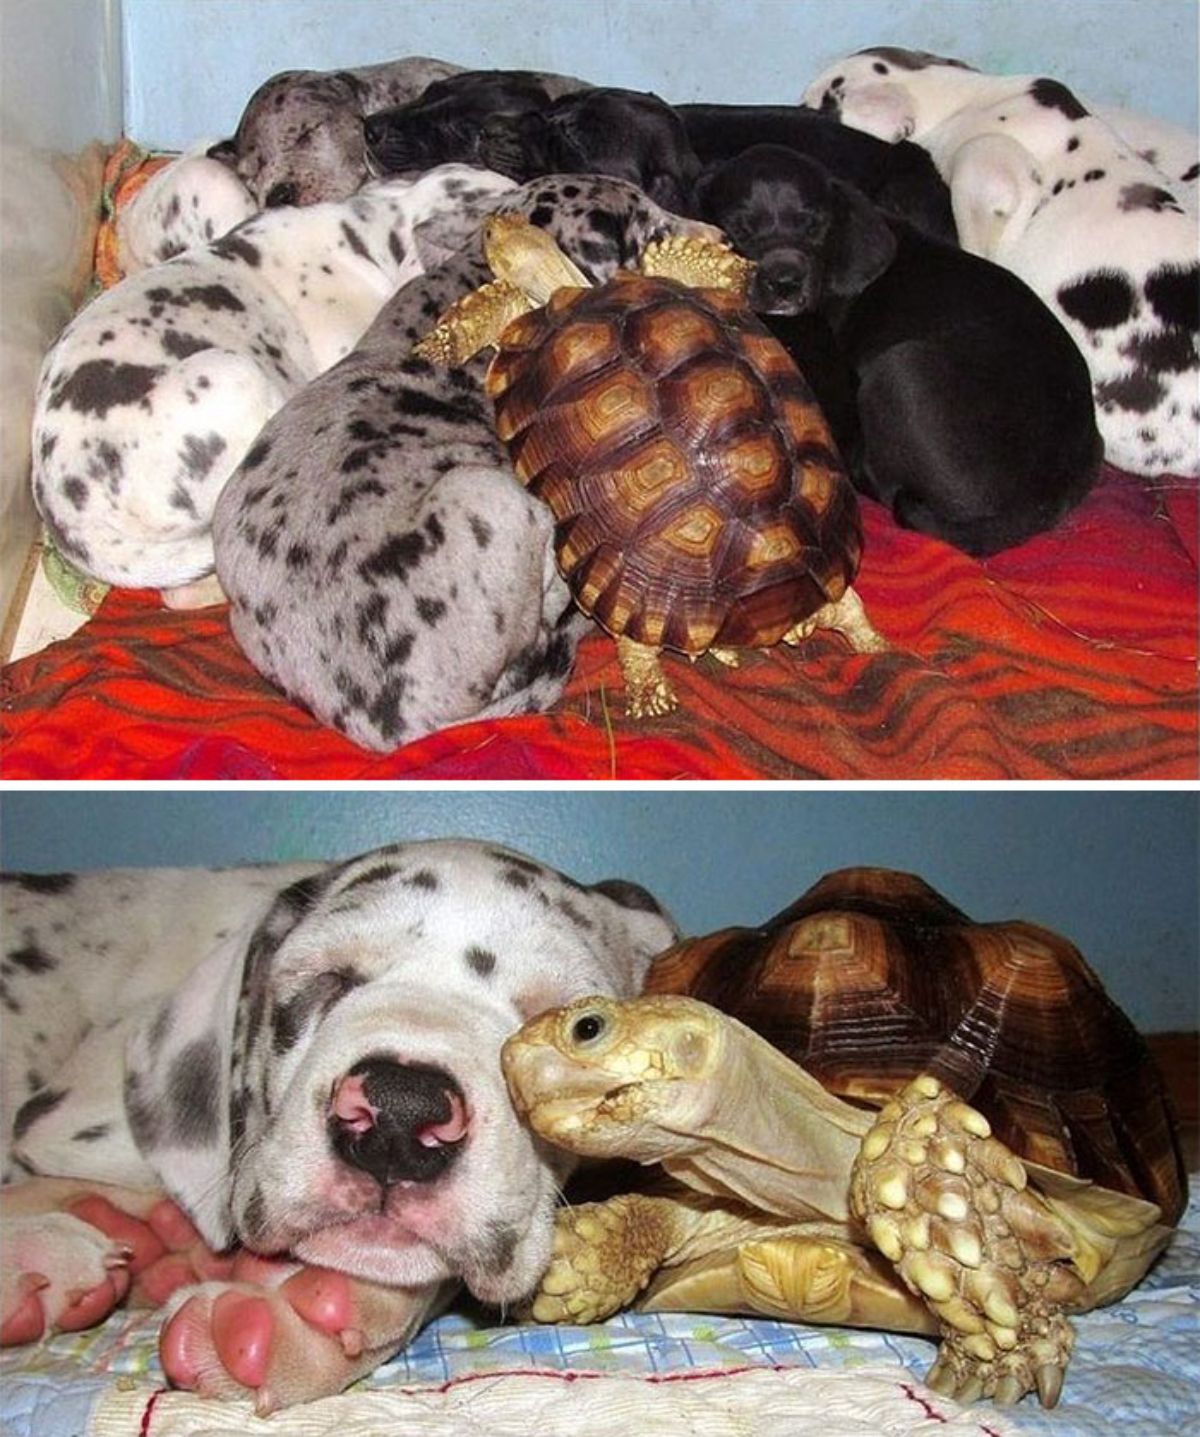 2 photos of a tortoise cuddling with some puppies